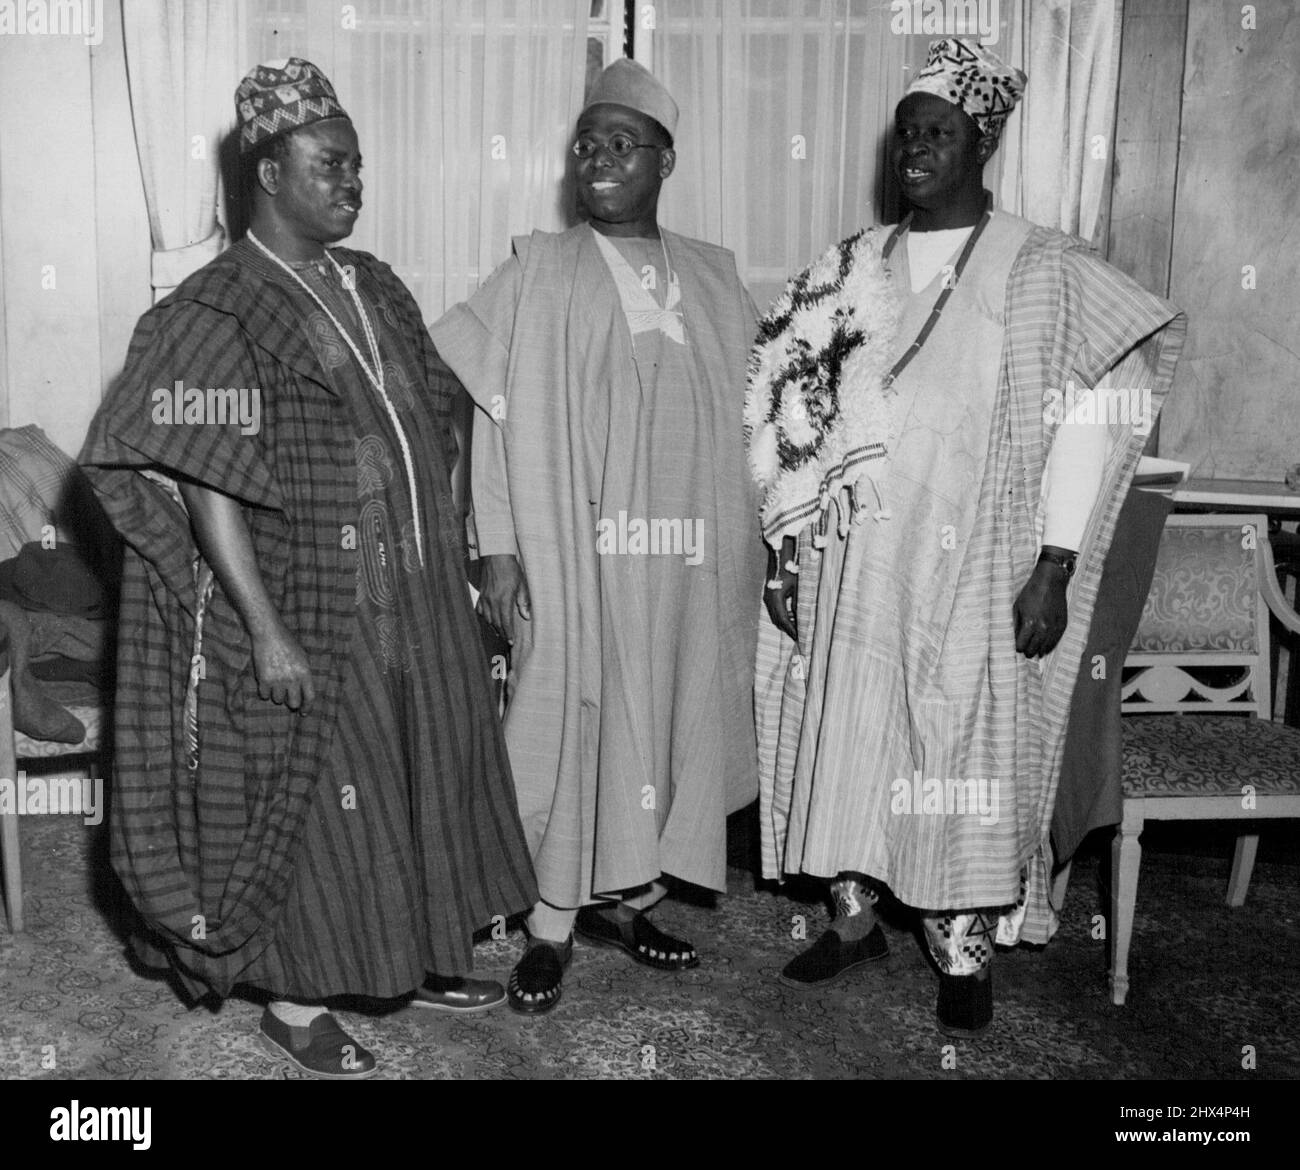 Here On Economic Mission. (Left to Right) Chief C.D. Akran (Minister of Development) Chief Obafemi Awolowo, Premier of Western region, and chief M.S. Sowole, Trade representative in London for the region, photographed at the Hyde park hotel, London, During the press conference. The Premier of the western region of Nigeria held a press conference in London today to give details of the economic mission visiting London from Western Nigeria. March 13, 1956. (Photo by Paul Popper, Paul Popper Ltd.). Stock Photo